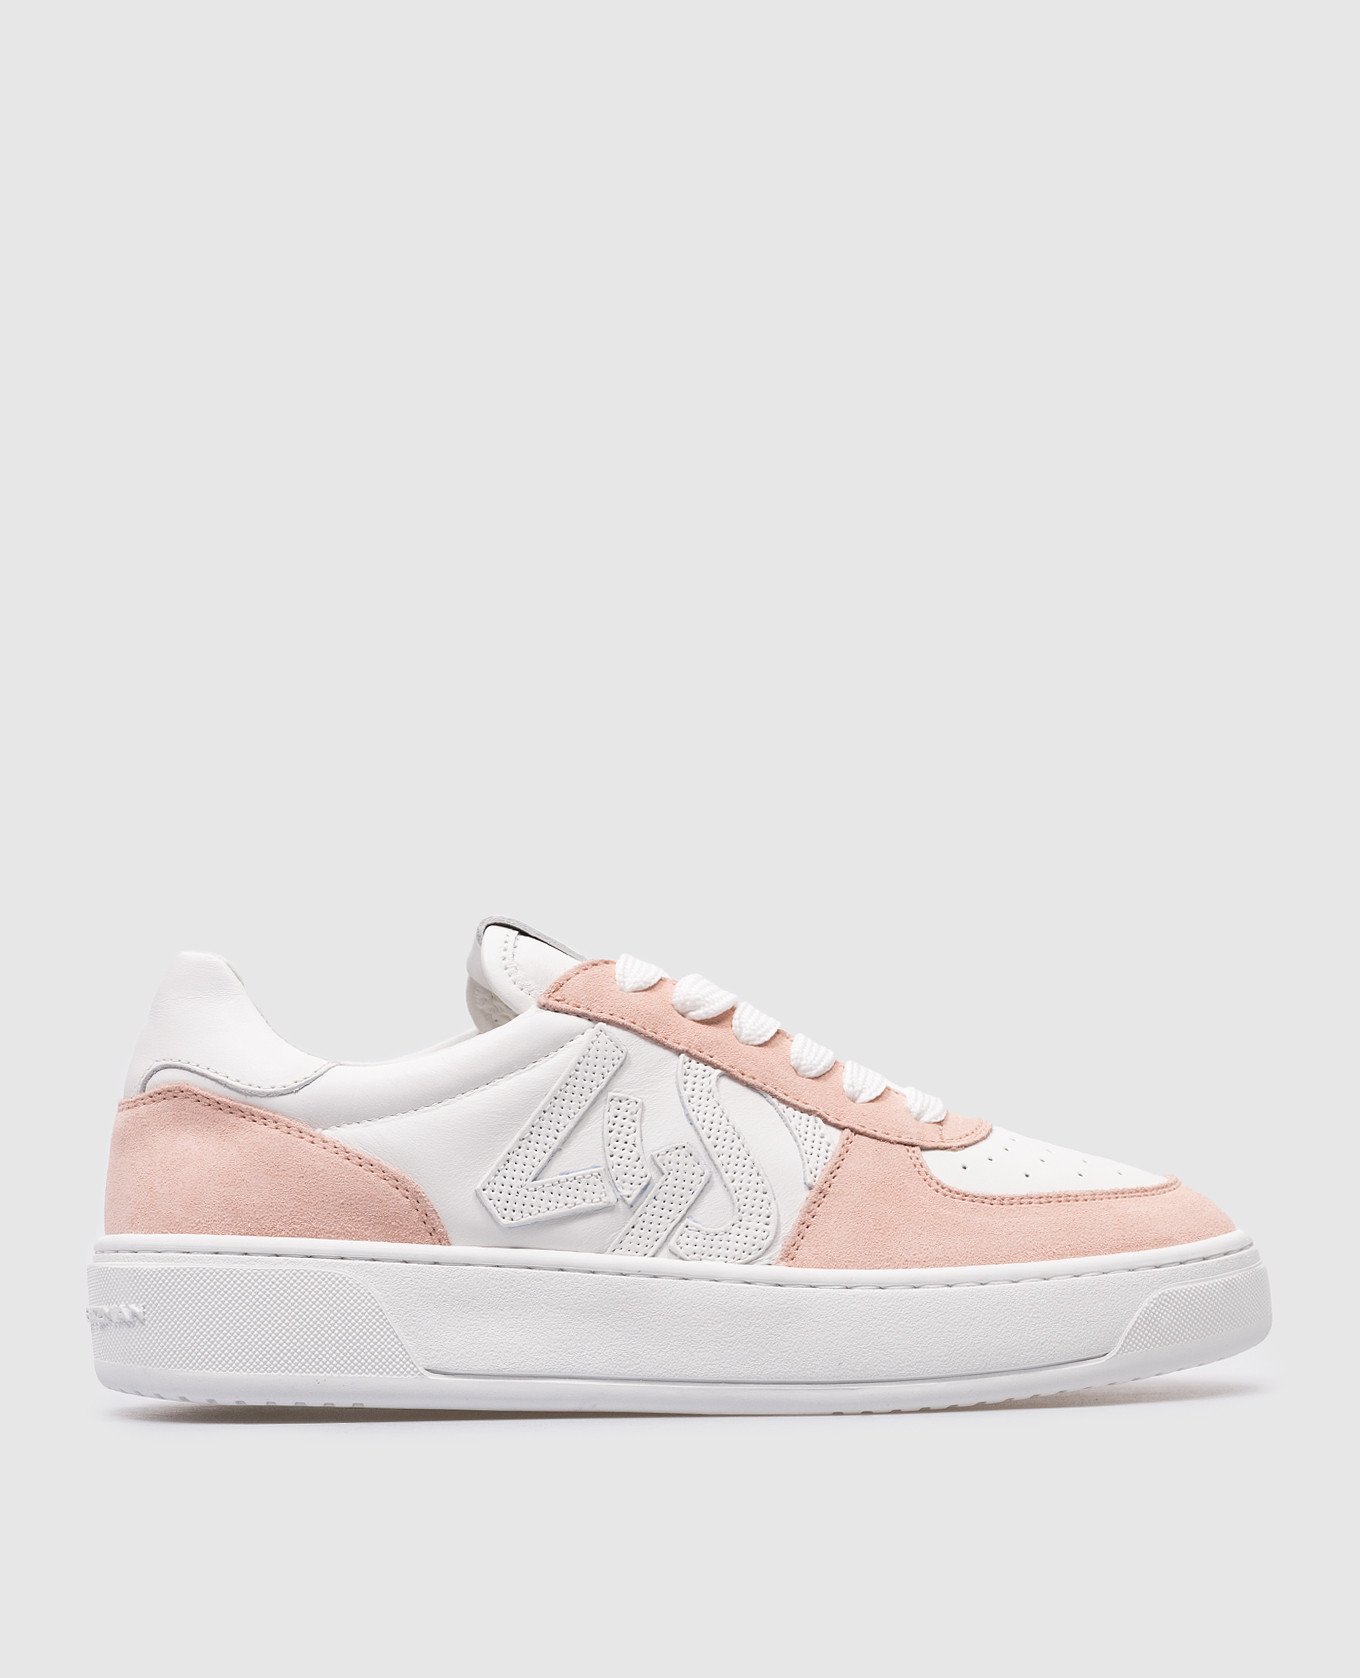 SW COURTSIDE MONOGRAM white leather sneakers